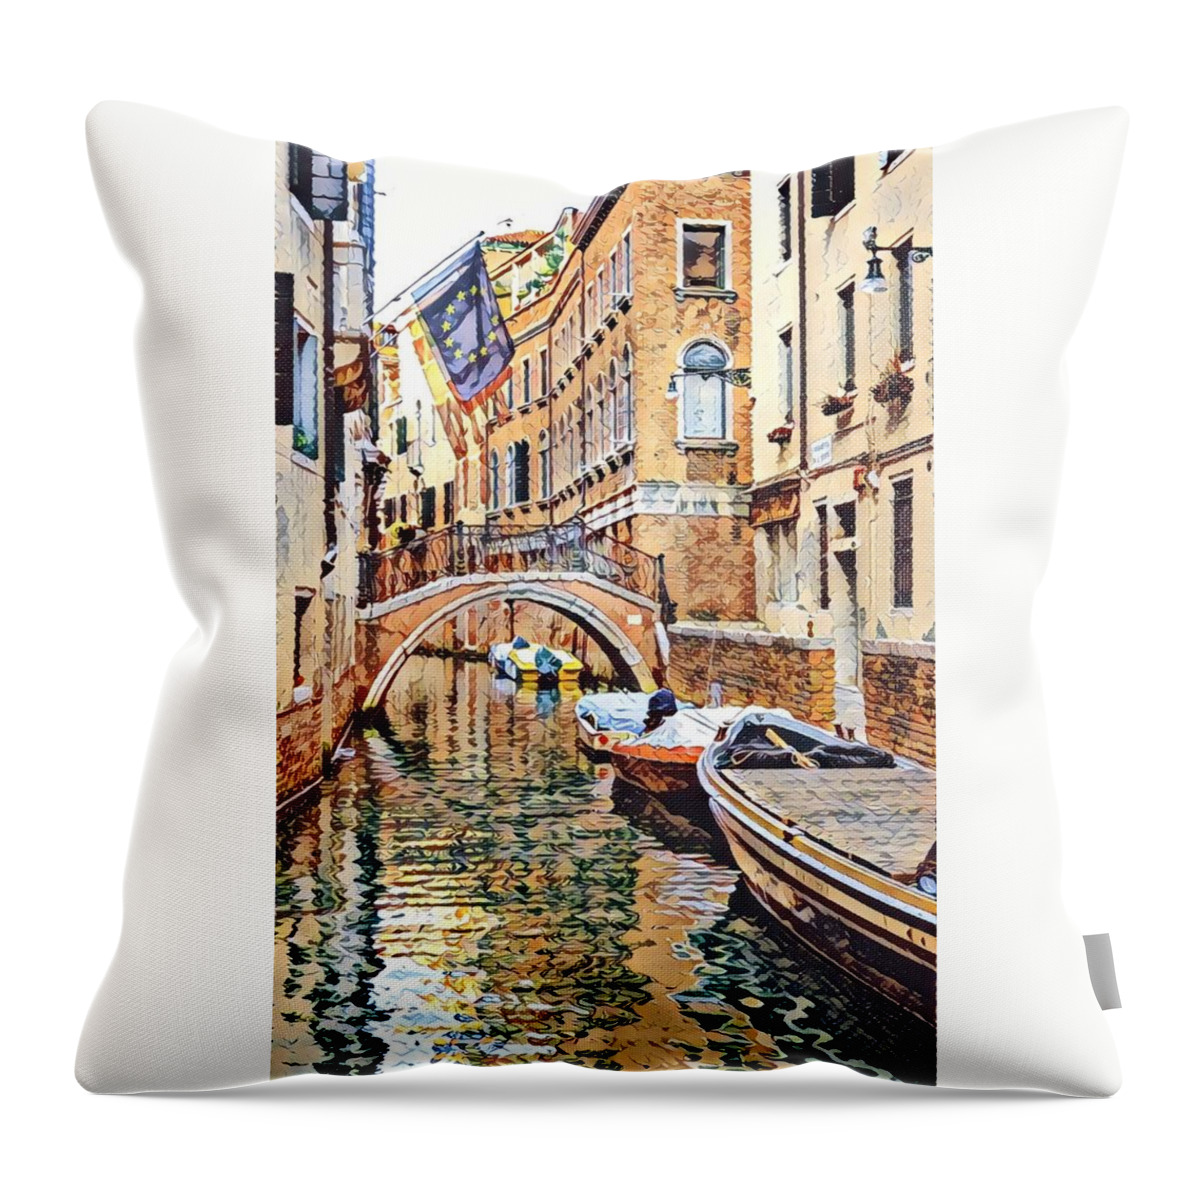  Throw Pillow featuring the photograph Venice Italy by Adam Green